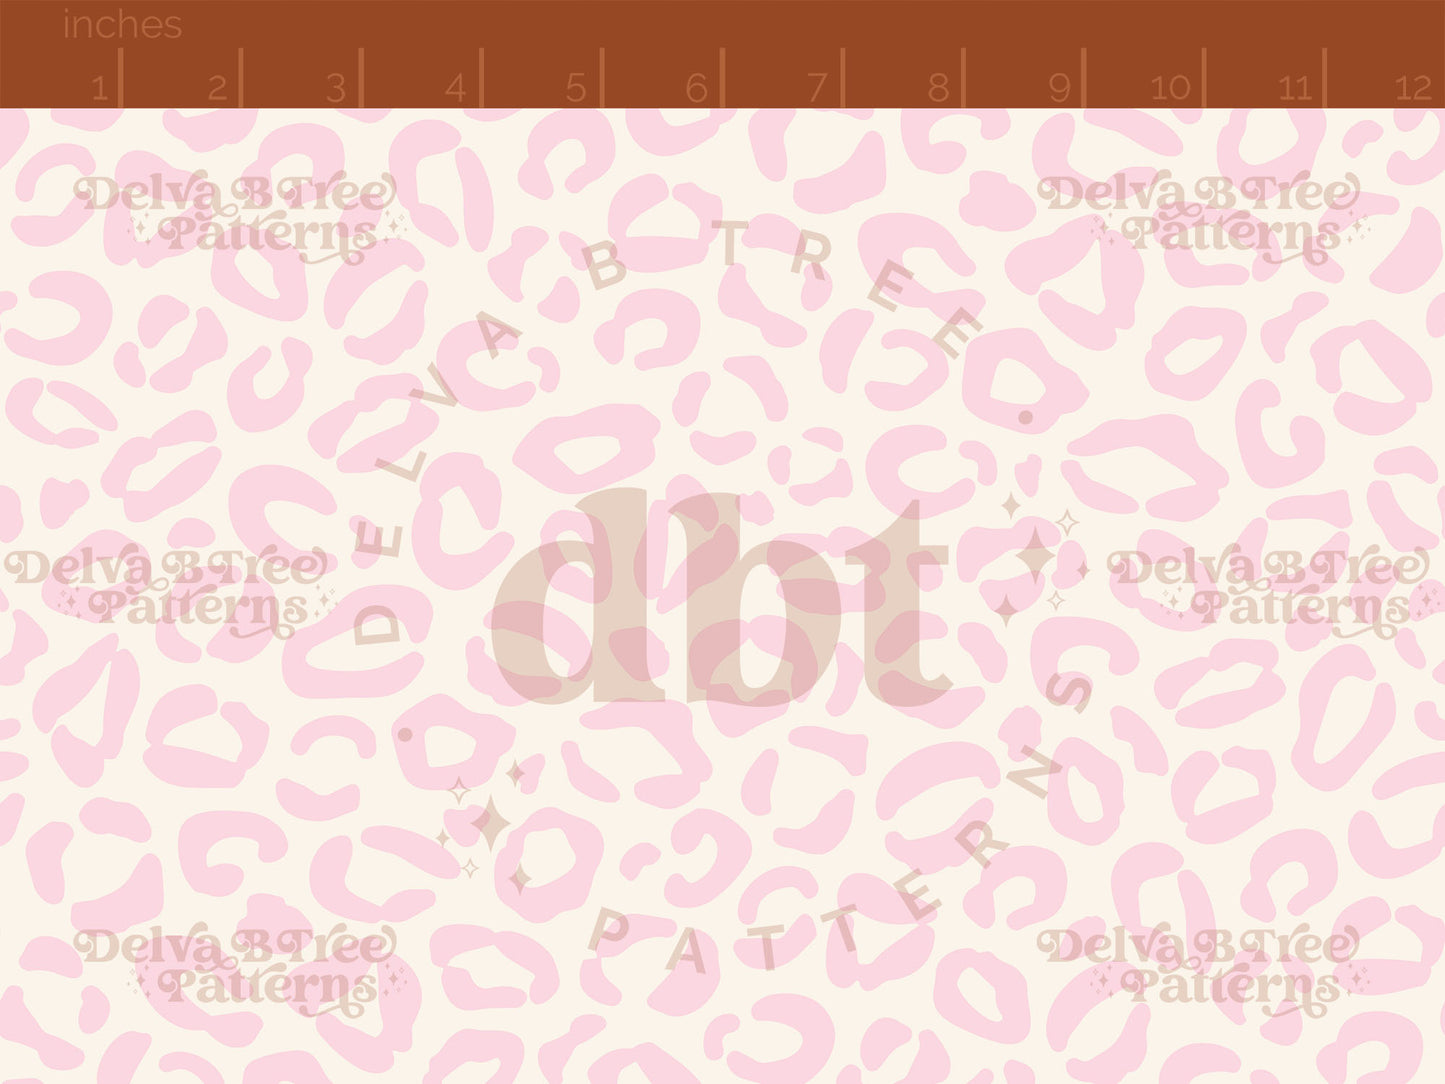 Pale pink and cream leopard print seamless pattern scale digital file for small shops that make handmade products in small batches.